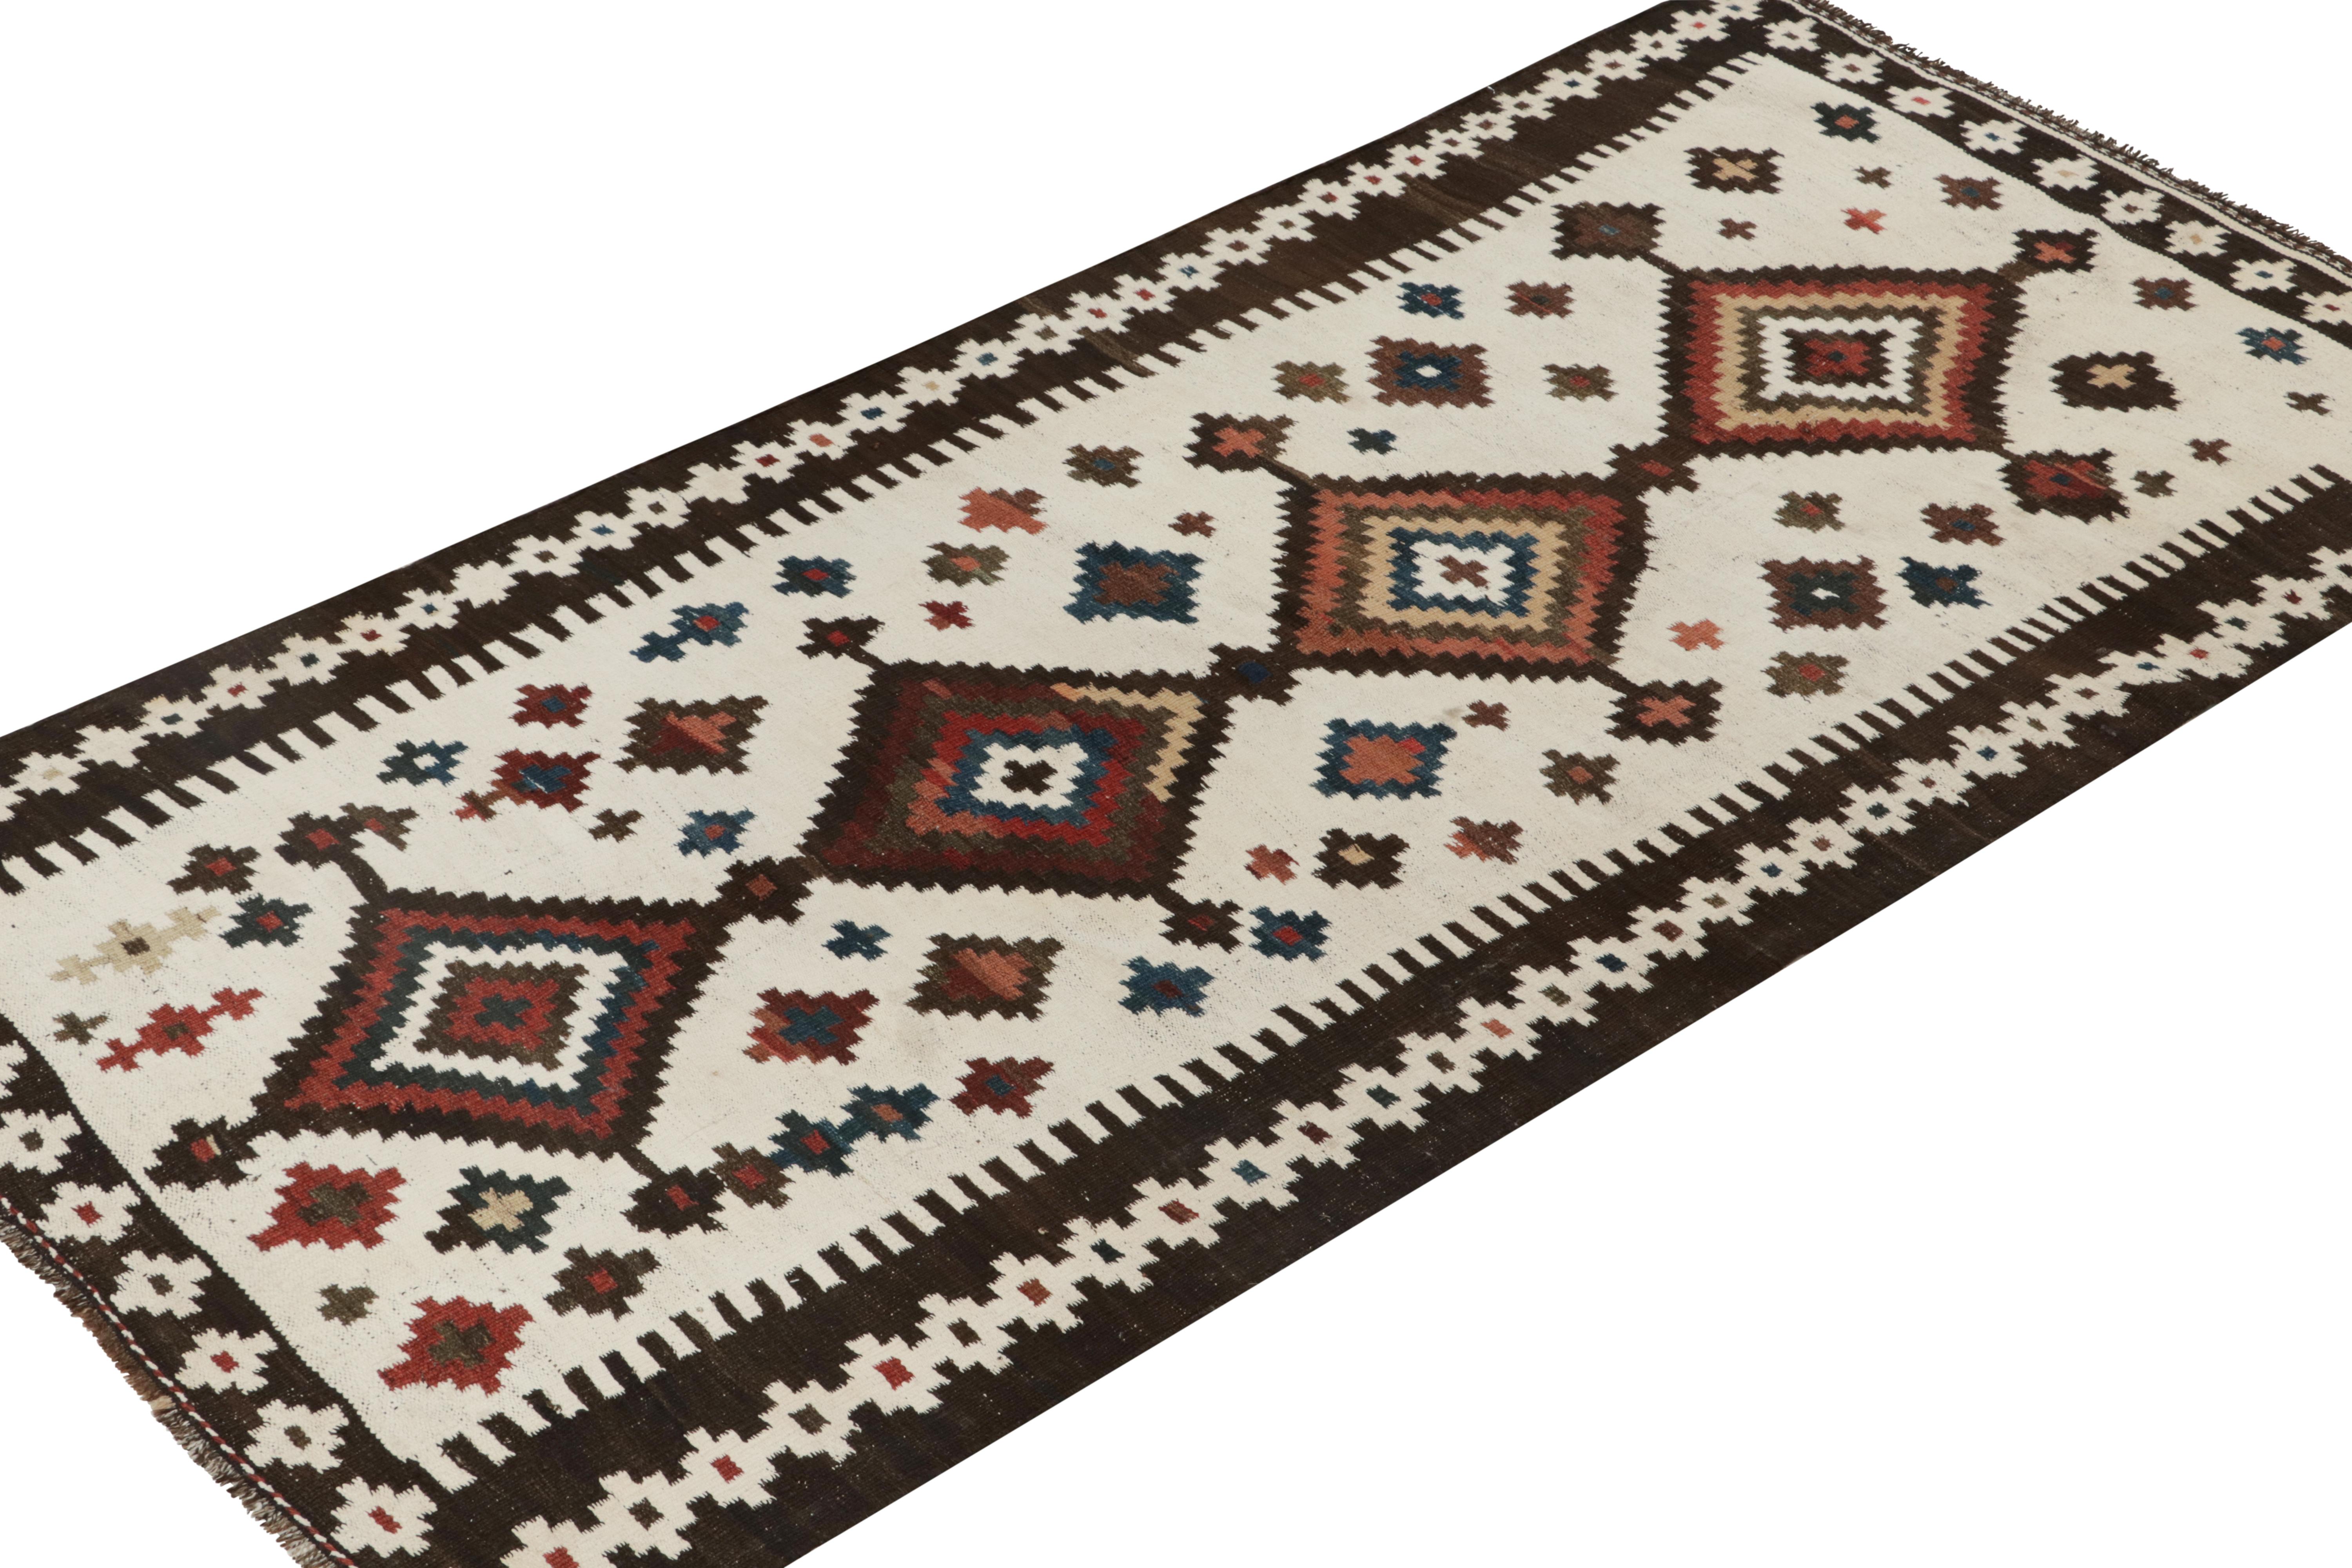 Tribal Vintage Persian Kilim in White with Brown Medallion Patterns by Rug & Kilim For Sale